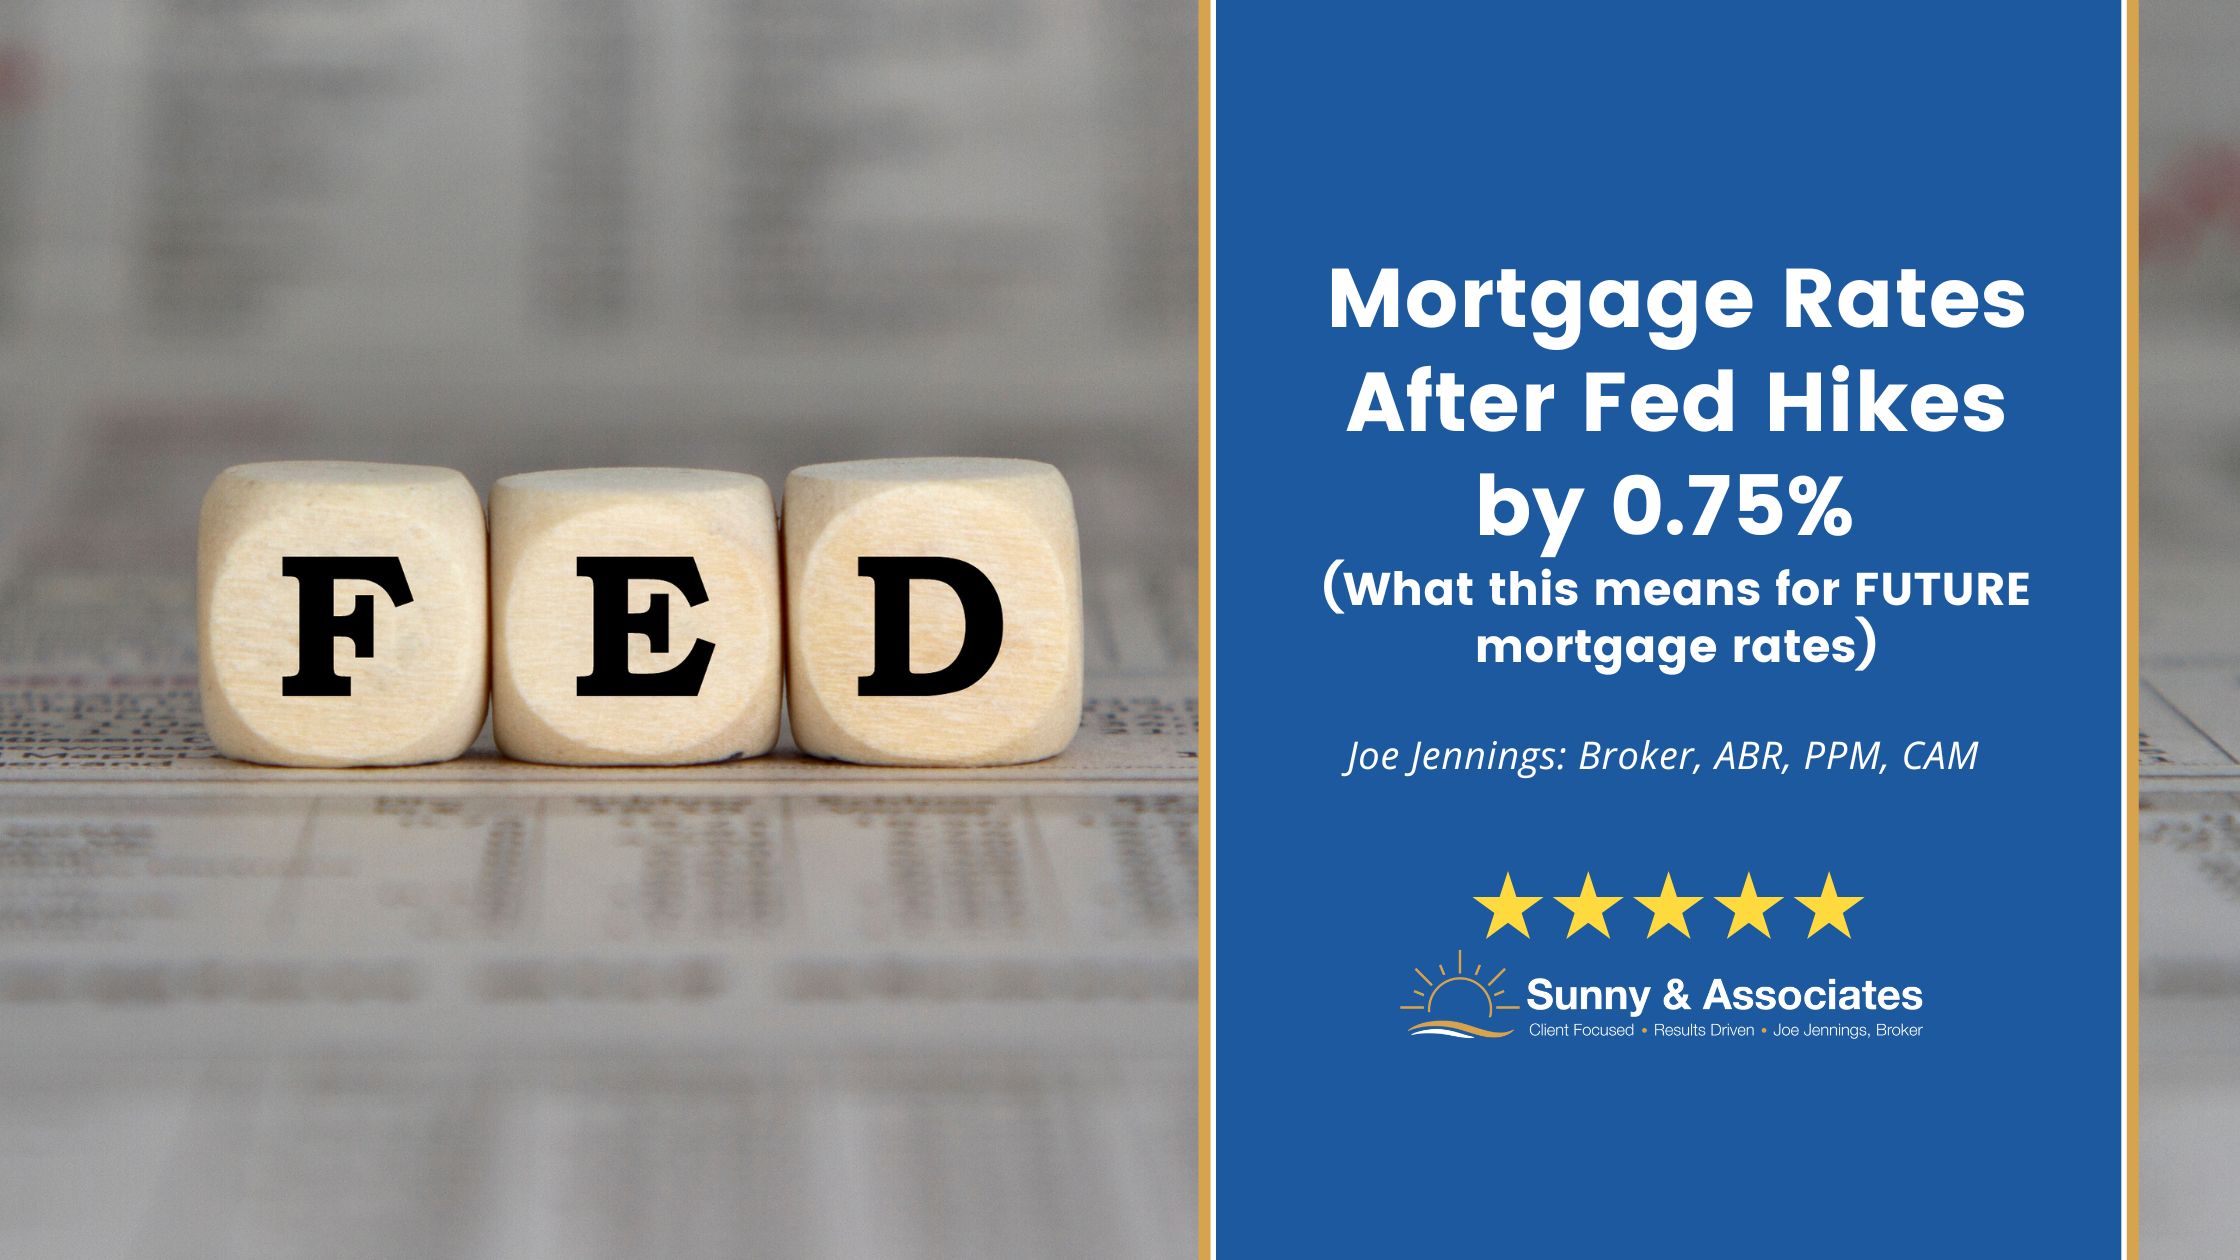 Mortgage Rates After FED Hikes By 0.75% What This Means For Future Mortgage Rates